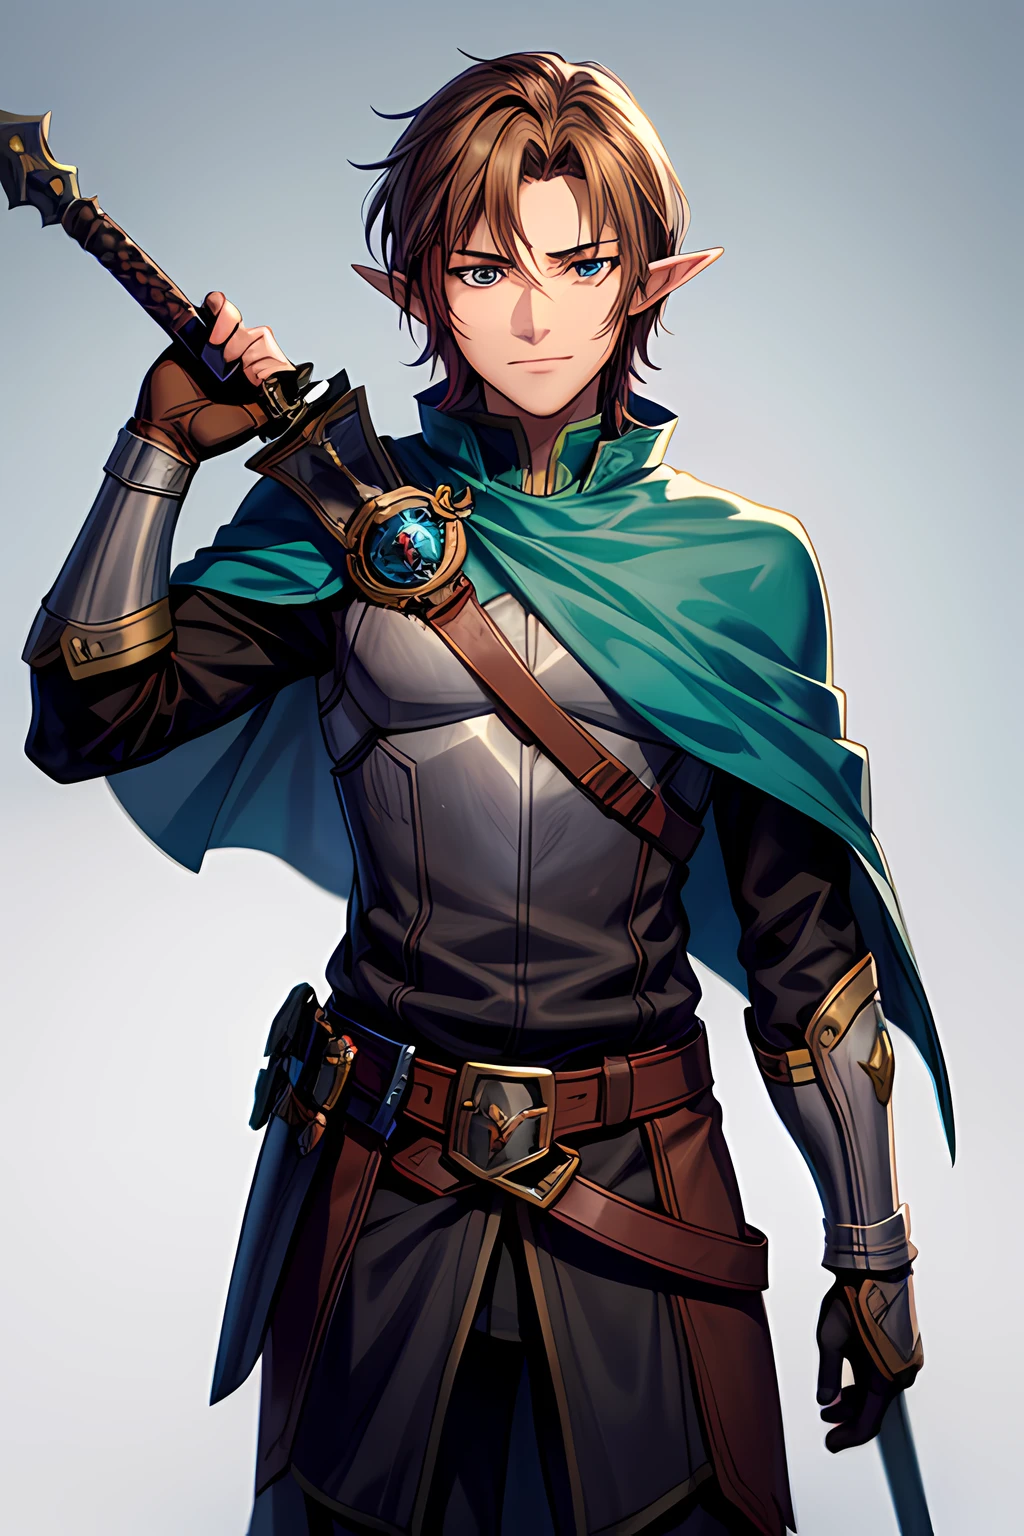 high detailed half-elf male, elf, brown_hair messy_hair smiling_face, green_eyes, scar_across_eye, pointed_ears, tan, armor breastplate blue_cape, leather_gloves, belt, belt_pounch, sword, sheath, paladin knight, simple_background, male_focus cowboy_shot solo, final fantasy tactics, jrpg, demacia, vox machina style